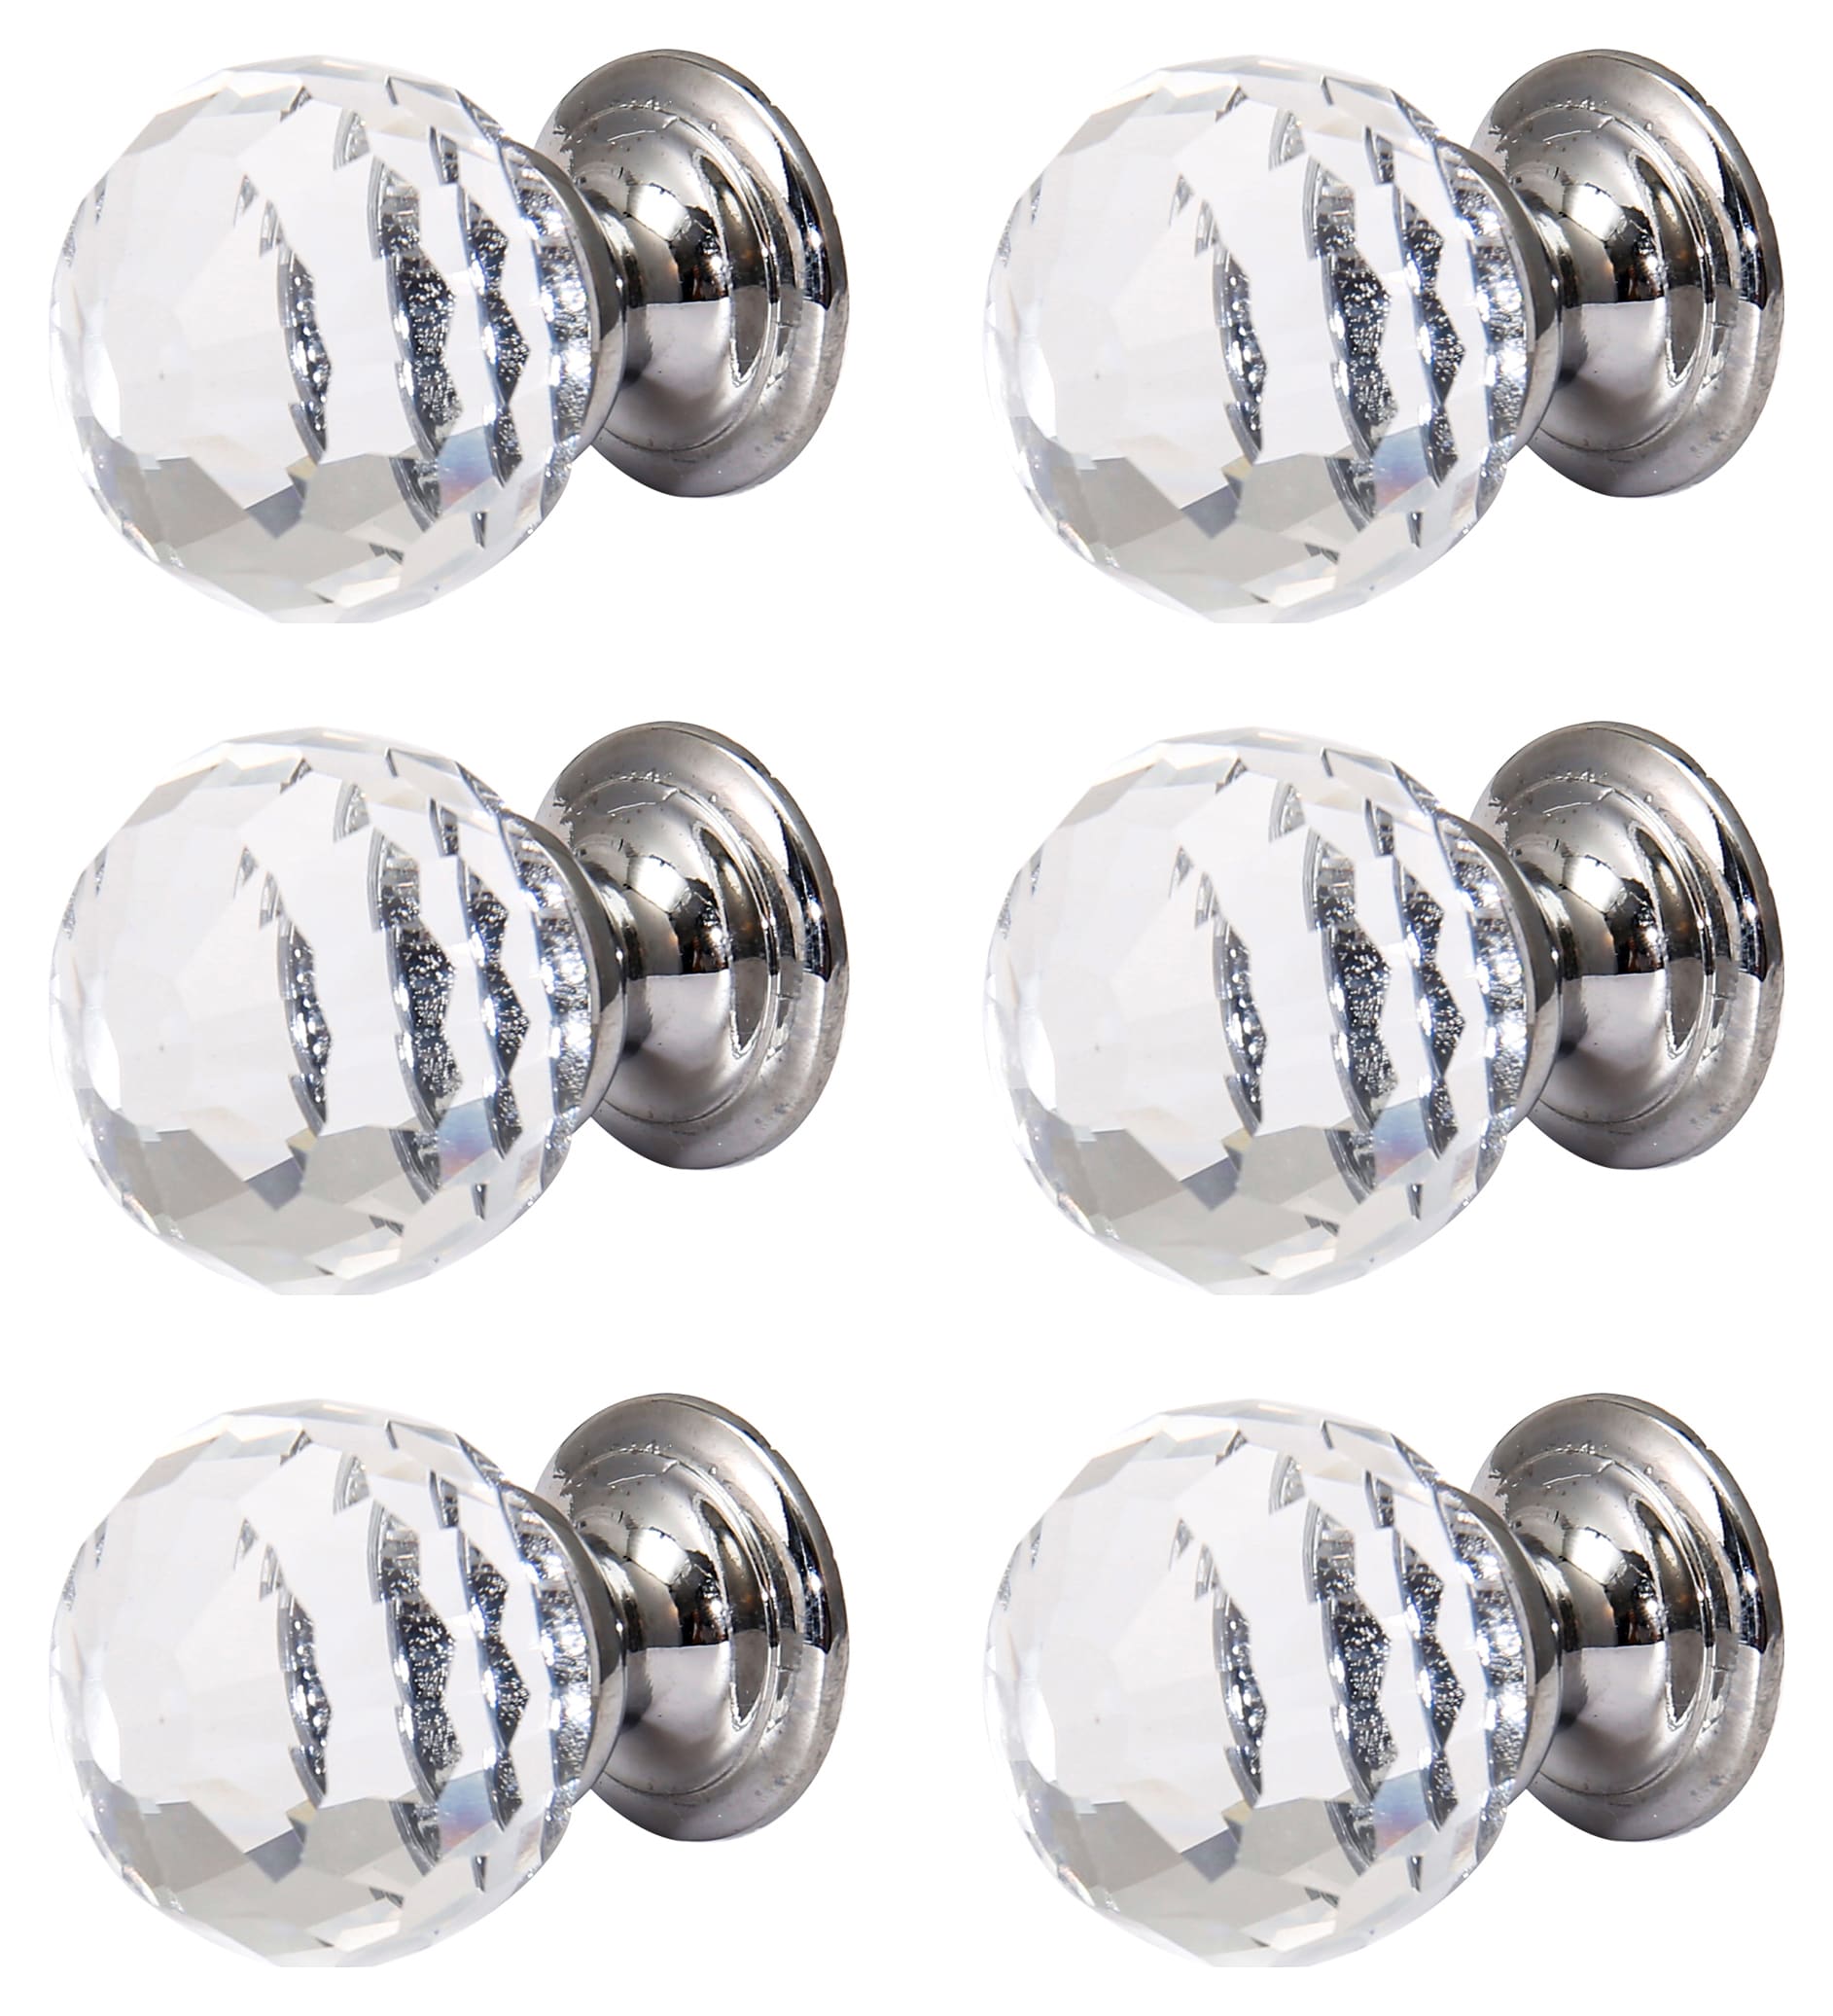 Glass Faceted Polished Chrome Door Knob - 30mm